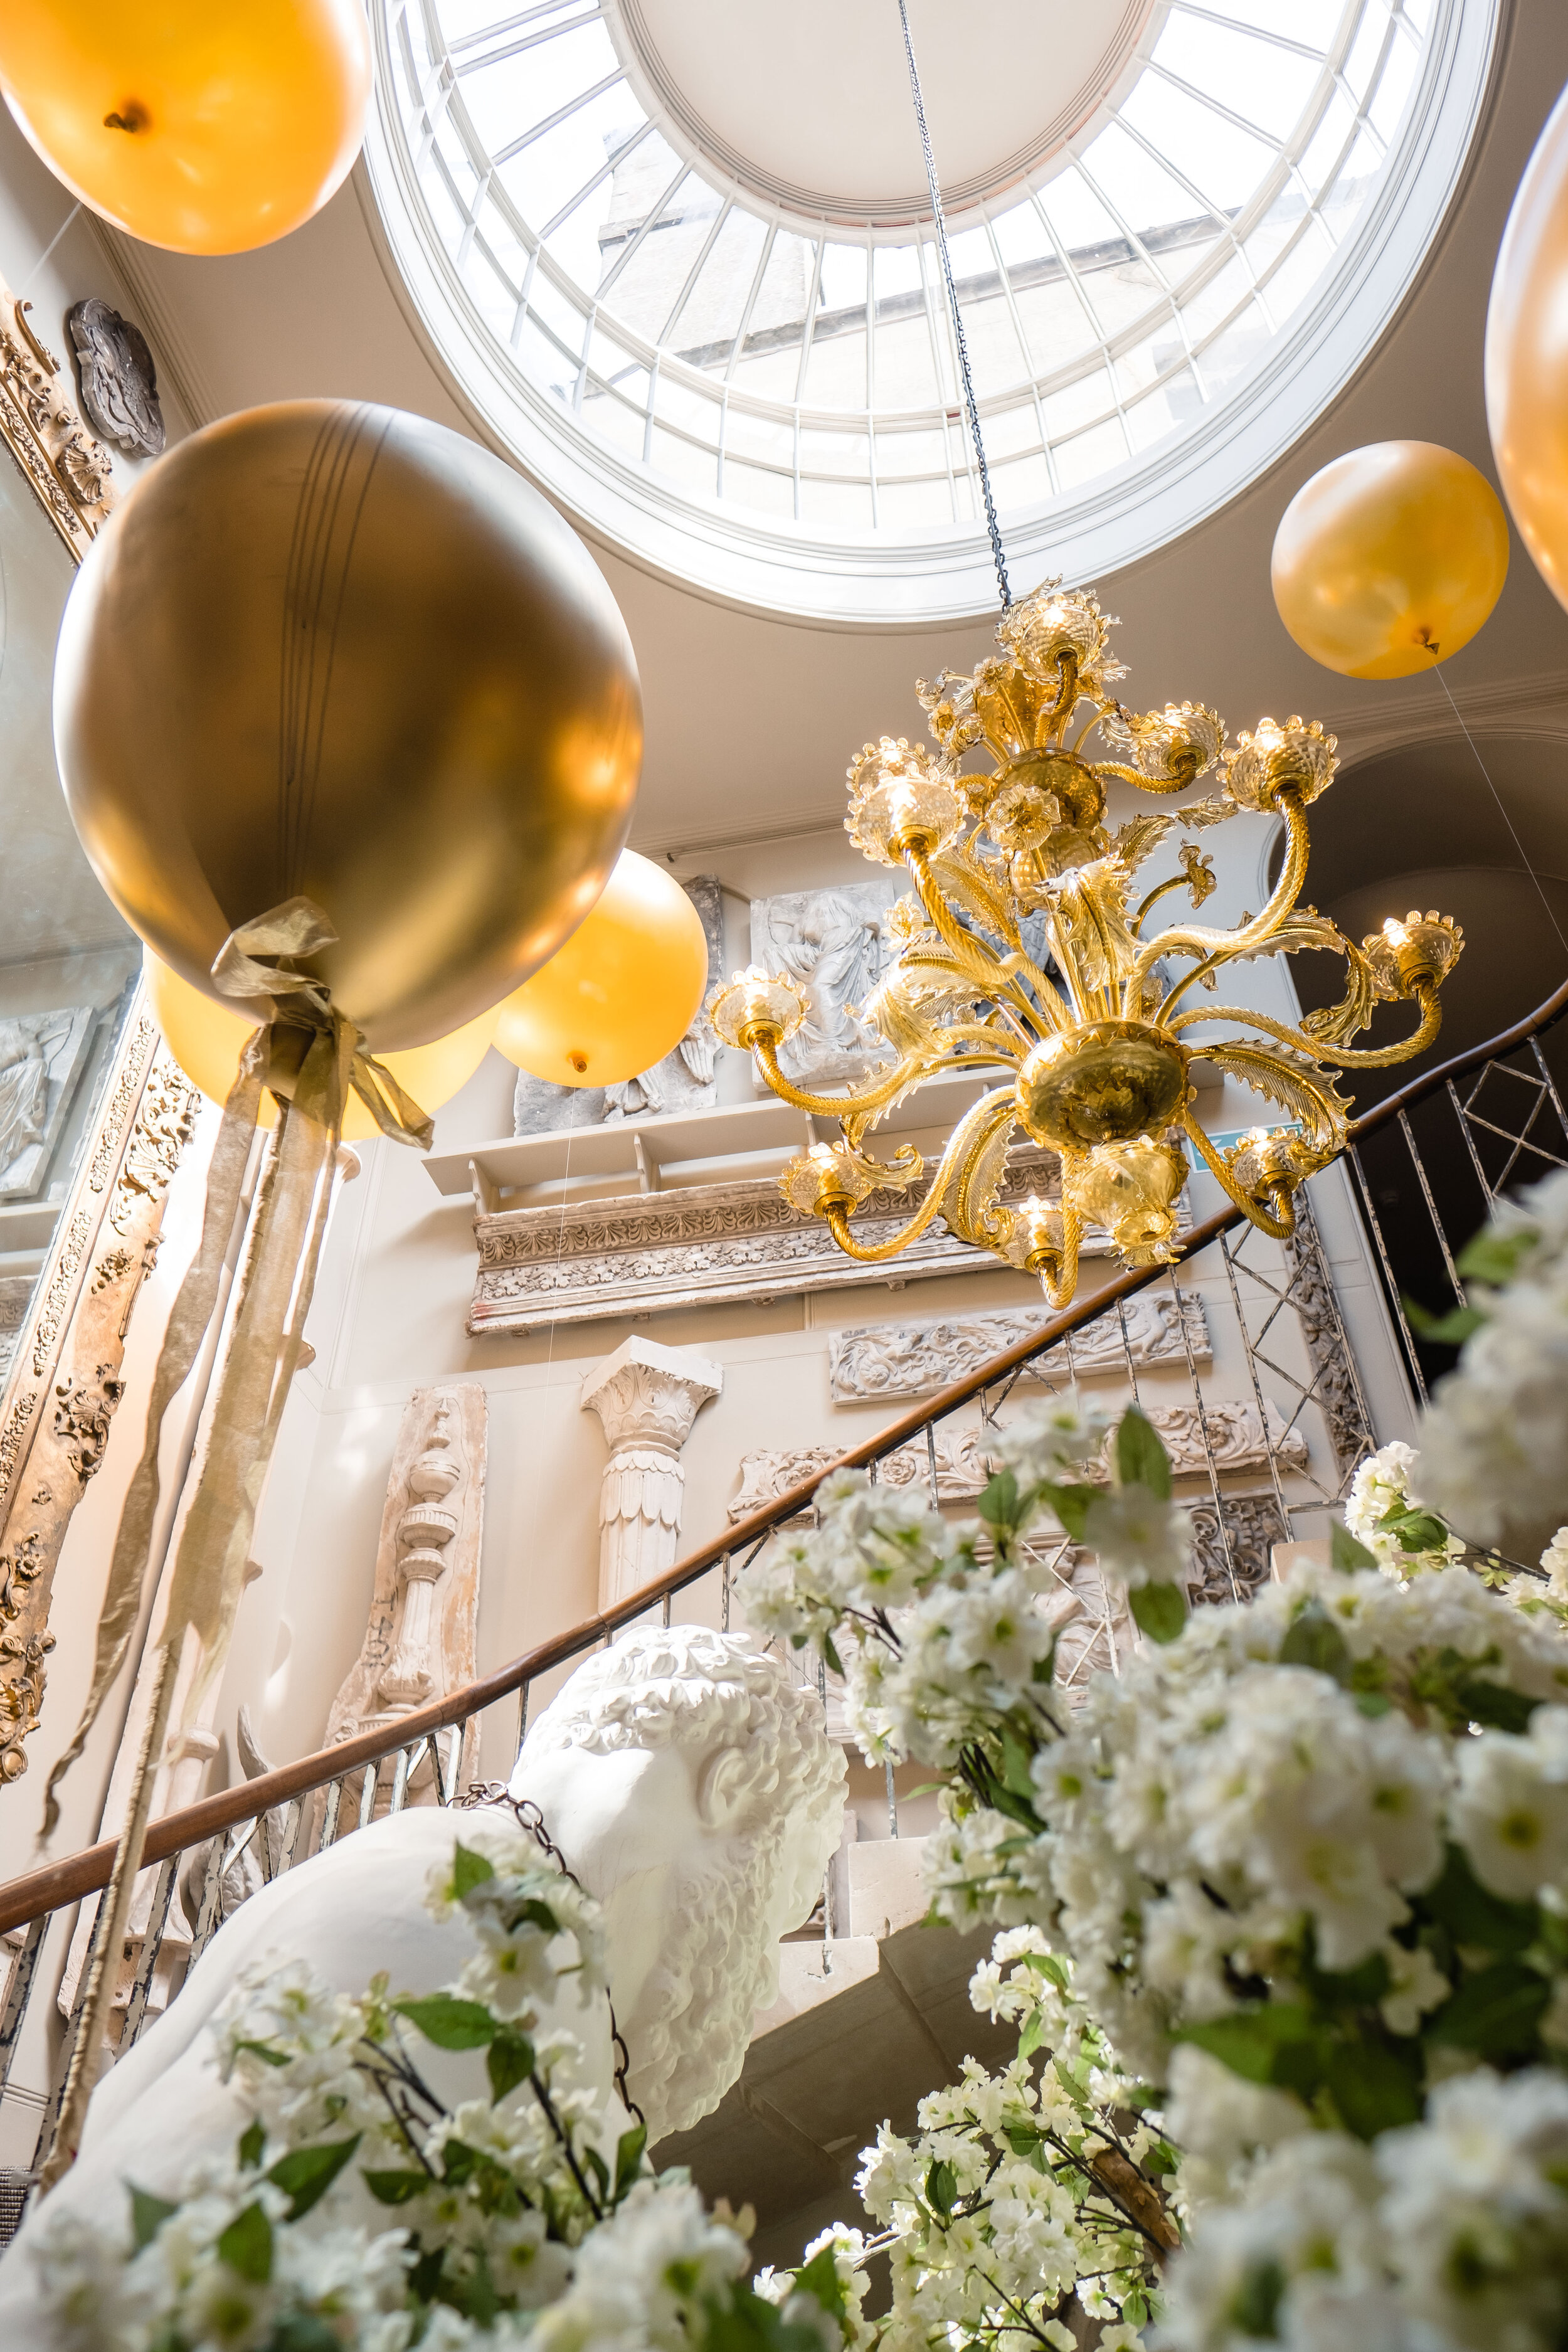 gold balloons decorating a stairwell